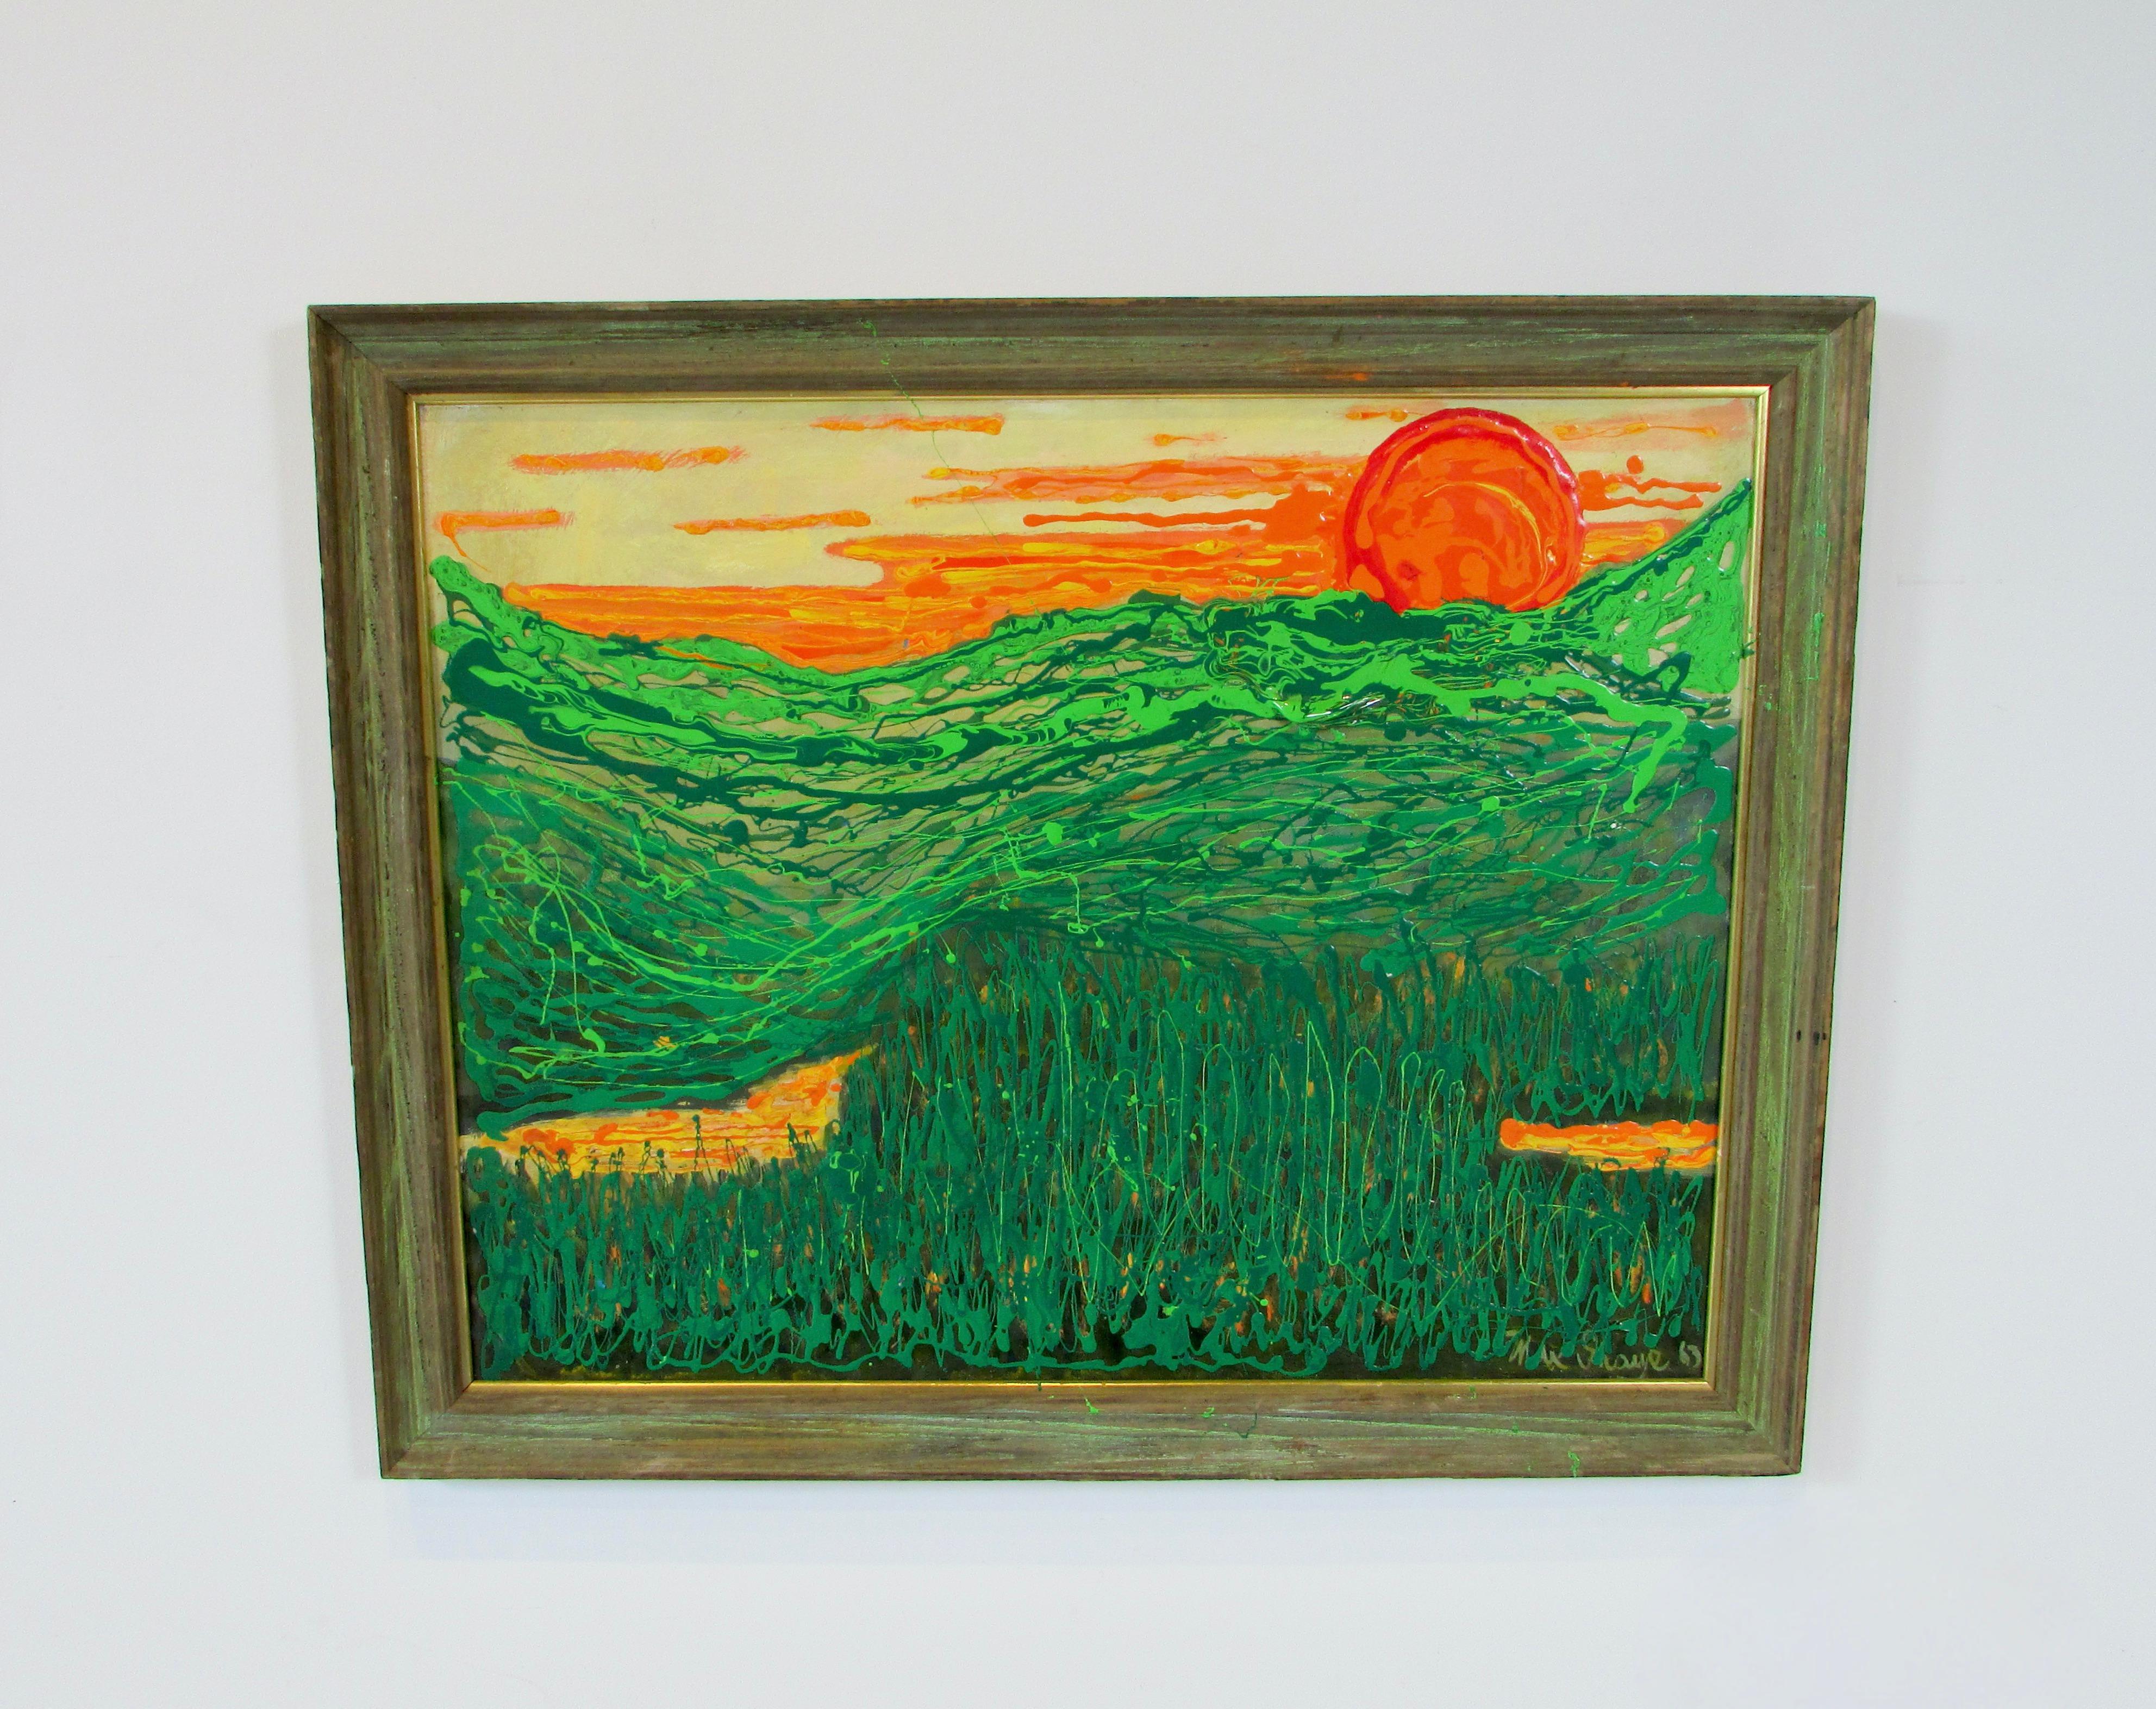 Interesting composition of dripped or splattered acrylic mixture over brushed finish board . Painter Max Share depicts bright orange sun over varied green valley . Appears to be in artists original frame .